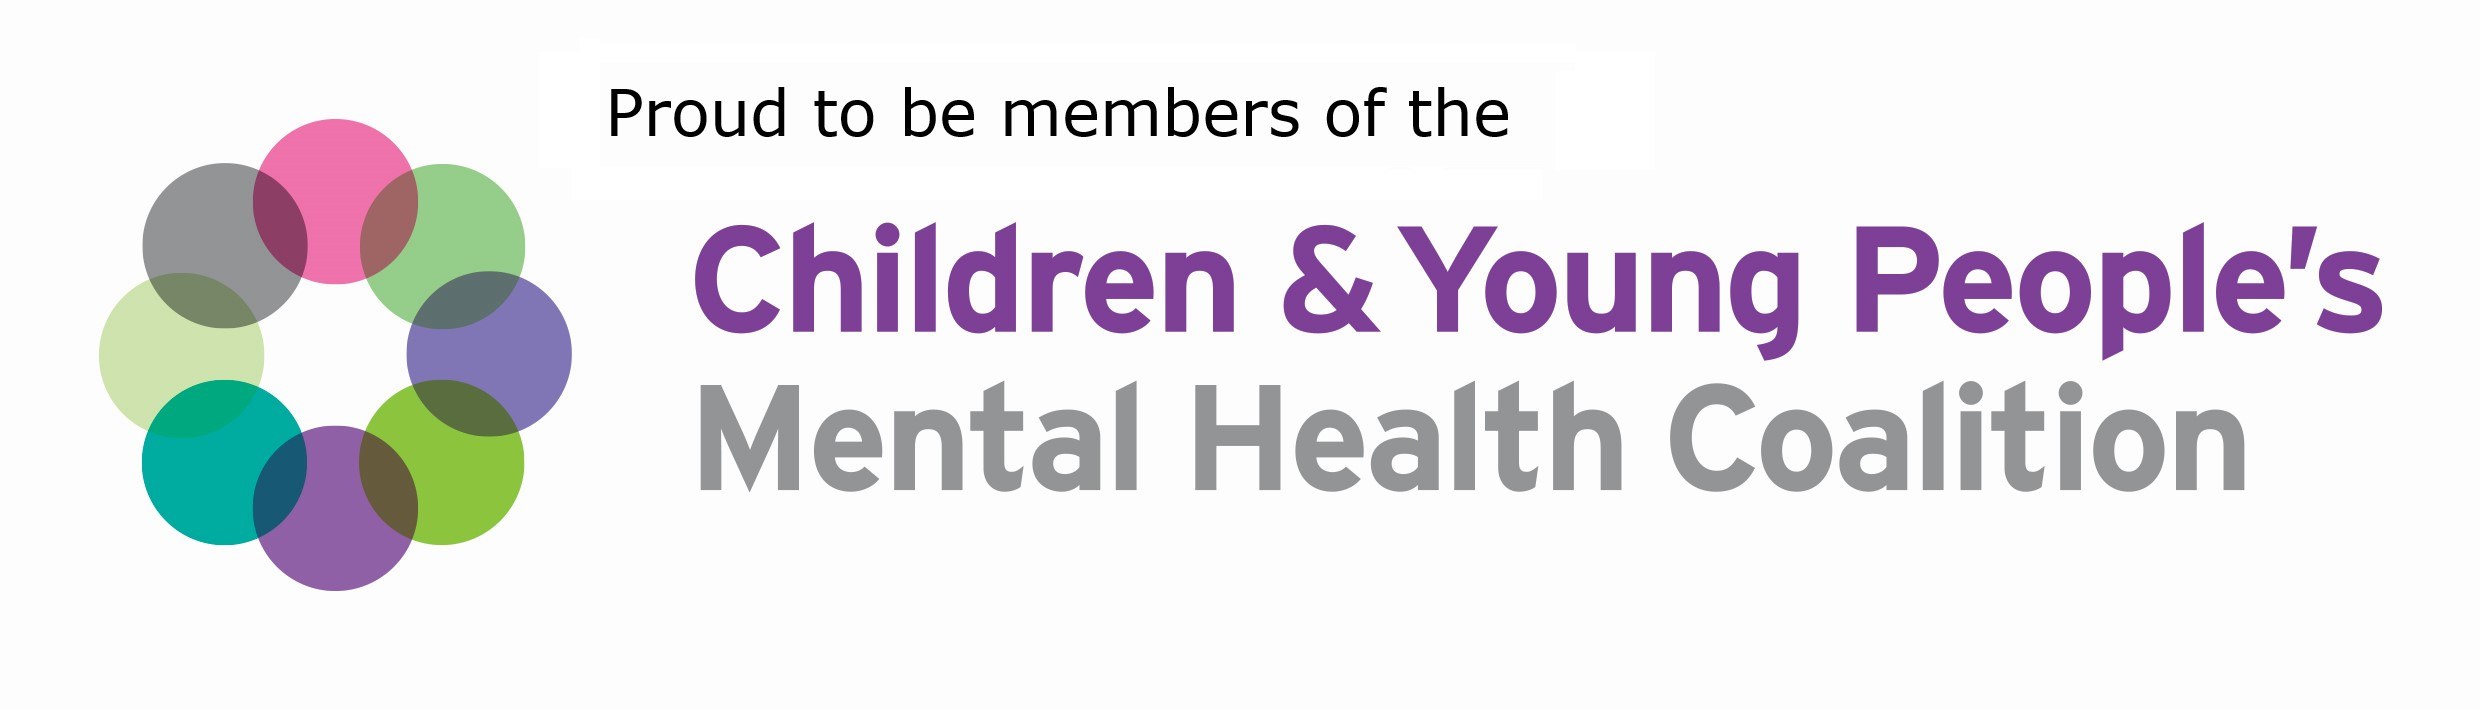 Children and Young People's Mental Health Coalition